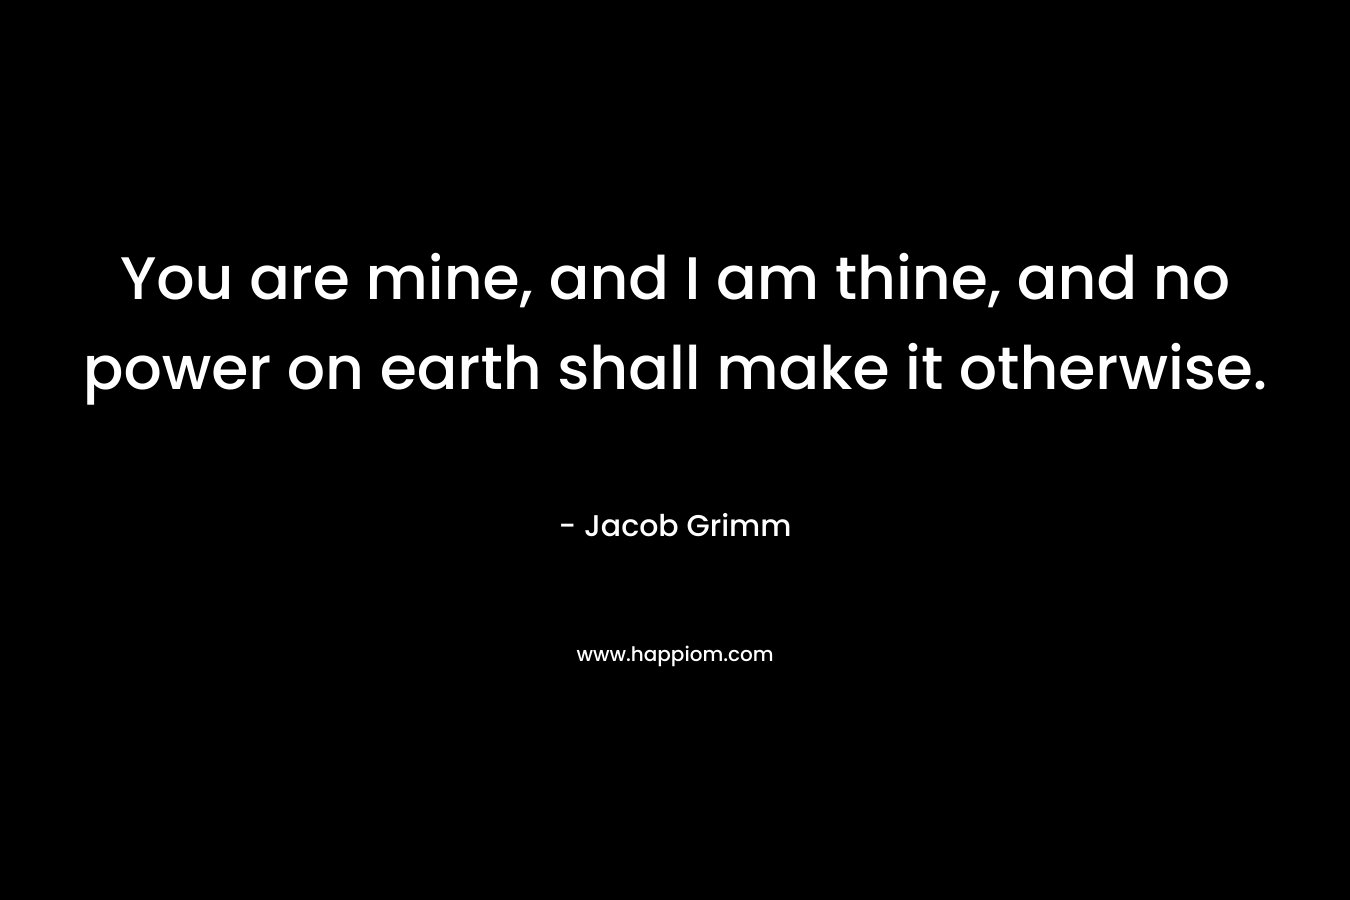 You are mine, and I am thine, and no power on earth shall make it otherwise. – Jacob Grimm